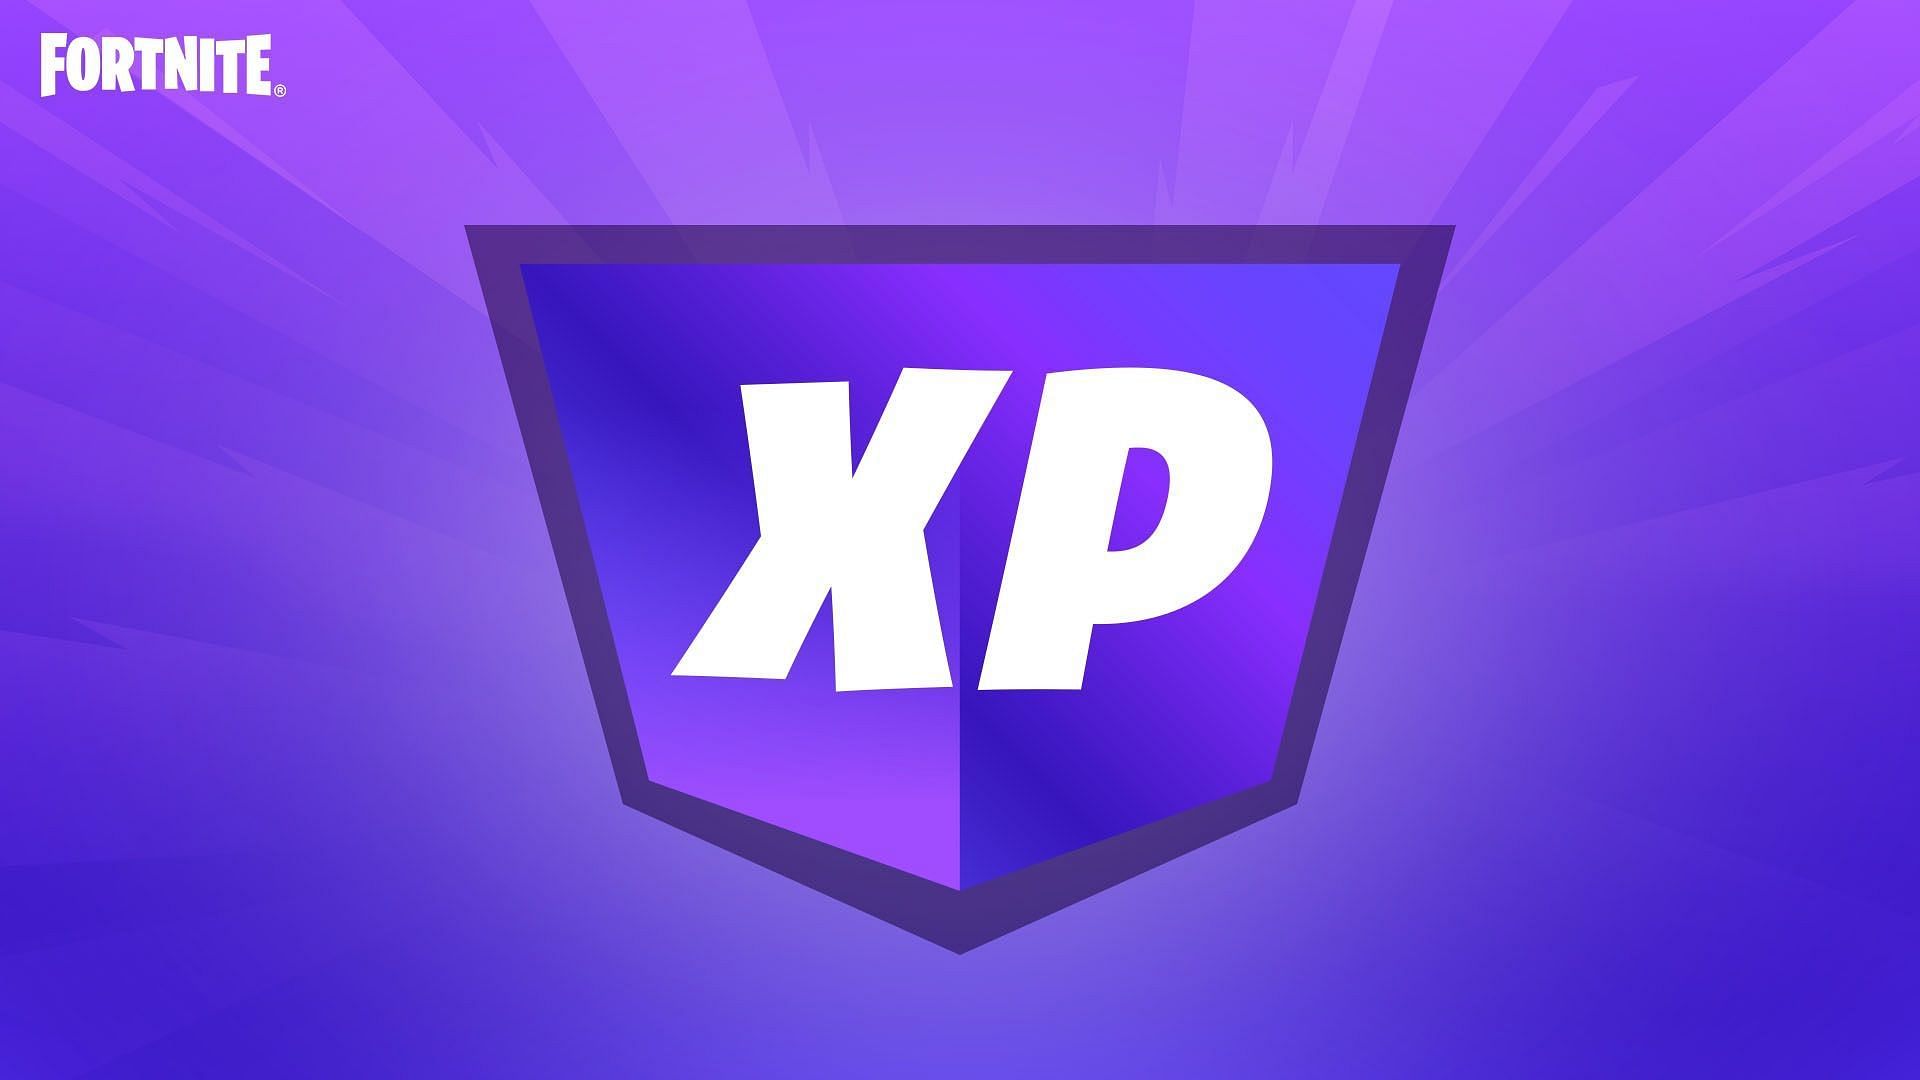 Epic Games has just nerfed XP in Fortnite Battle Royale. [Image via Epic Games]